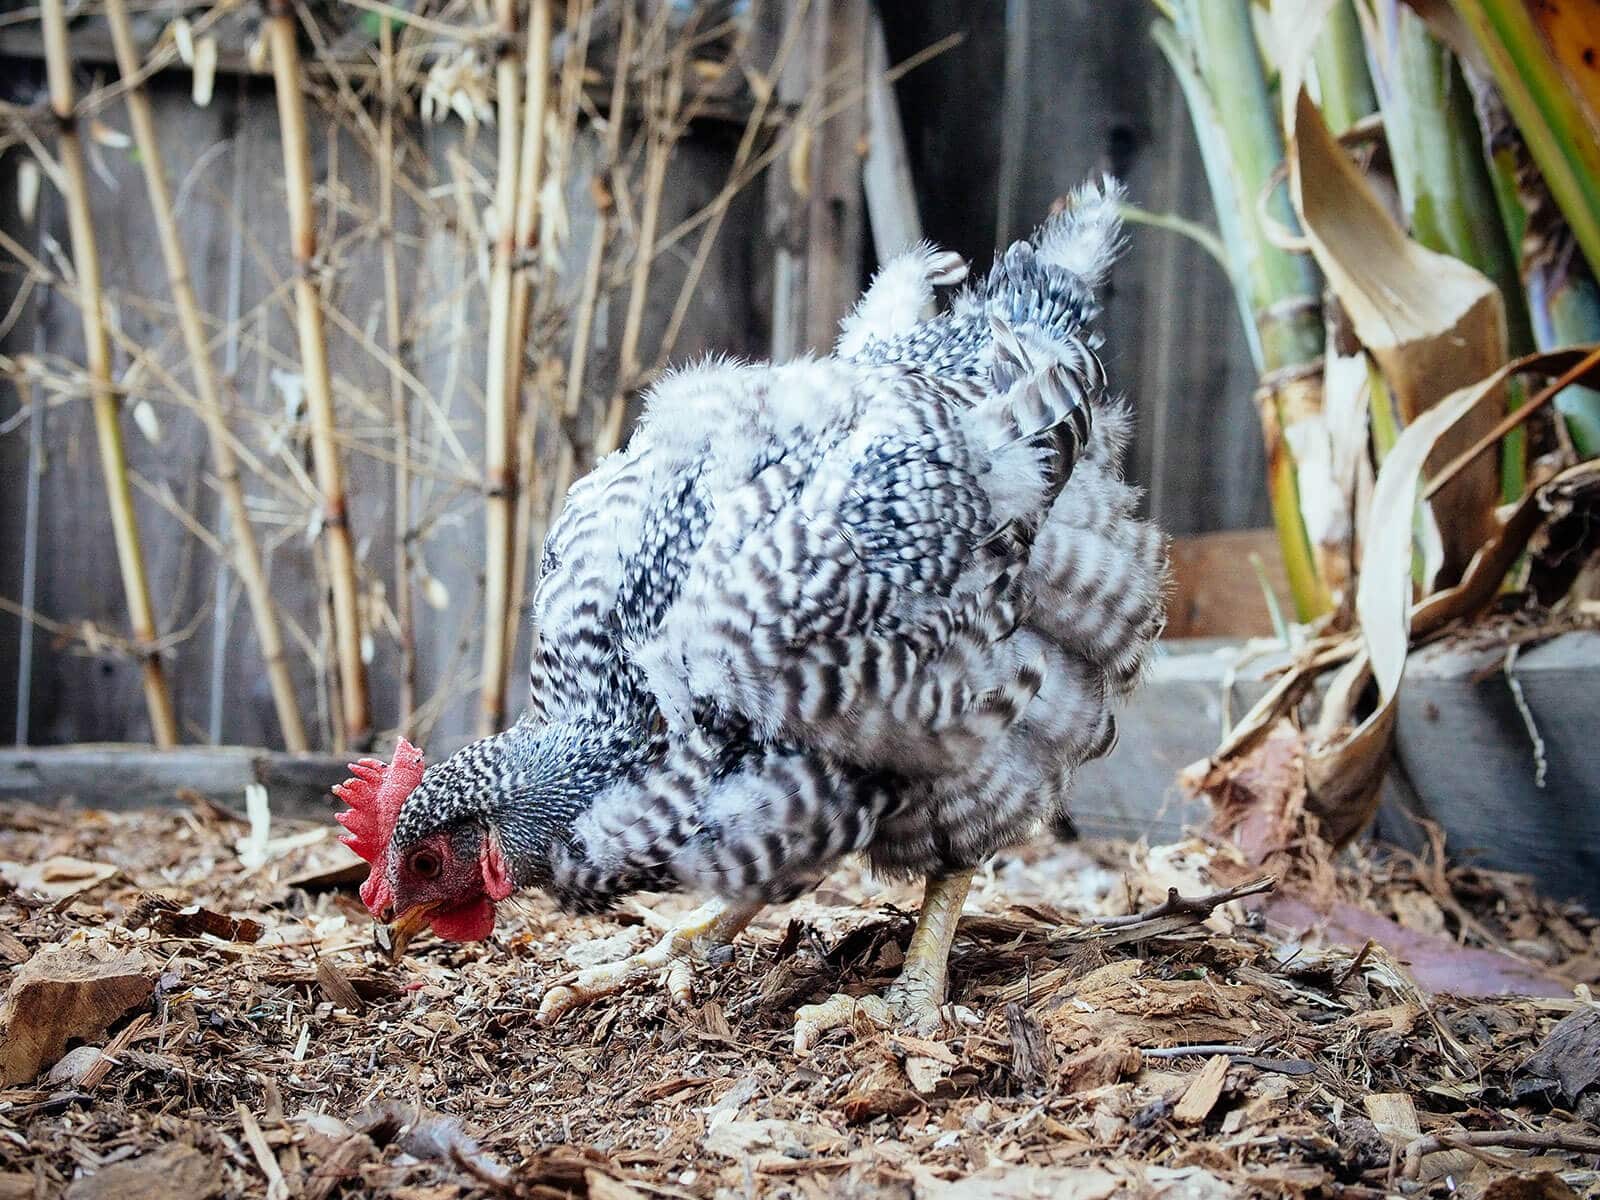 Barred Rock with new feathers starting to grow out